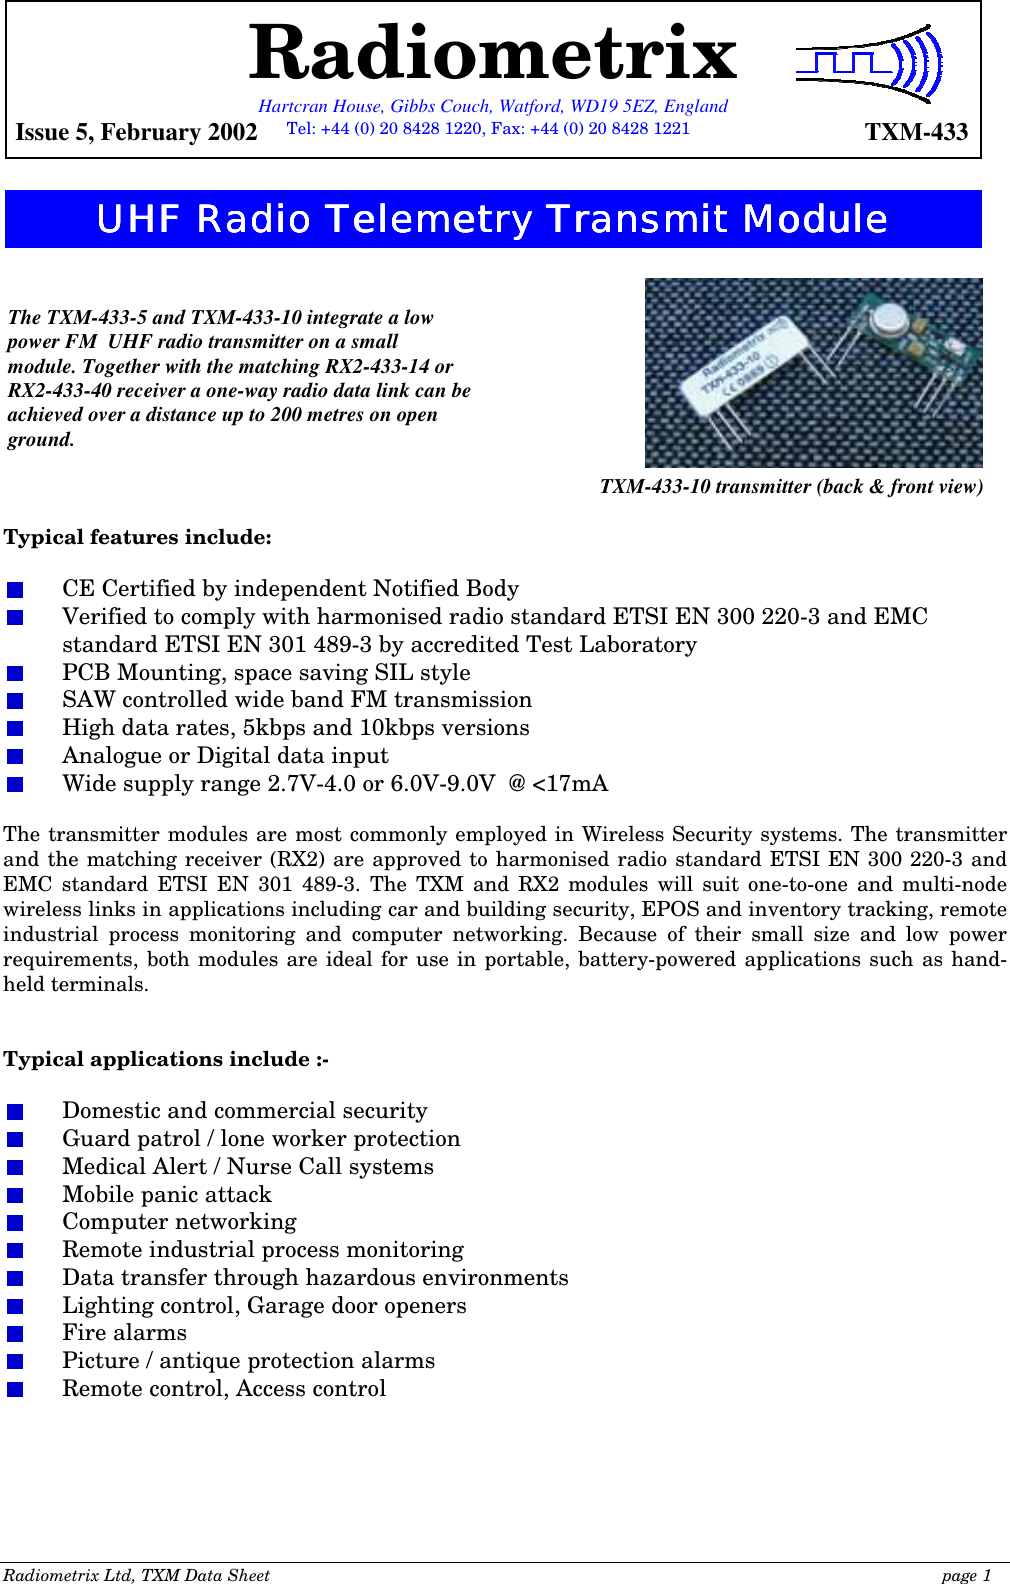 Radiometrix Ltd, TXM Data Sheet                                                                                              page 1                  Typical features include:    CE Certified by independent Notified Body   Verified to comply with harmonised radio standard ETSI EN 300 220-3 and EMC standard ETSI EN 301 489-3 by accredited Test Laboratory   PCB Mounting, space saving SIL style   SAW controlled wide band FM transmission   High data rates, 5kbps and 10kbps versions   Analogue or Digital data input   Wide supply range 2.7V-4.0 or 6.0V-9.0V  @ &lt;17mA  The transmitter modules are most commonly employed in Wireless Security systems. The transmitter and the matching receiver (RX2) are approved to harmonised radio standard ETSI EN 300 220-3 and EMC standard ETSI EN 301 489-3. The TXM and RX2 modules will suit one-to-one and multi-node wireless links in applications including car and building security, EPOS and inventory tracking, remote industrial process monitoring and computer networking. Because of their small size and low power requirements, both modules are ideal for use in portable, battery-powered applications such as hand-held terminals.   Typical applications include :-    Domestic and commercial security   Guard patrol / lone worker protection   Medical Alert / Nurse Call systems   Mobile panic attack  Computer networking   Remote industrial process monitoring   Data transfer through hazardous environments   Lighting control, Garage door openers  Fire alarms   Picture / antique protection alarms   Remote control, Access control The TXM-433-5 and TXM-433-10 integrate a low power FM  UHF radio transmitter on a small module. Together with the matching RX2-433-14 or RX2-433-40 receiver a one-way radio data link can be achieved over a distance up to 200 metres on open ground. TXM-433-10 transmitter (back &amp; front view) Radiometrix Hartcran House, Gibbs Couch, Watford, WD19 5EZ, England  Issue 5, February 2002    TXM-433 UHF Radio Telemetry Transmit ModuleUHF Radio Telemetry Transmit ModuleUHF Radio Telemetry Transmit ModuleUHF Radio Telemetry Transmit Module    Tel: +44 (0) 20 8428 1220, Fax: +44 (0) 20 8428 1221 